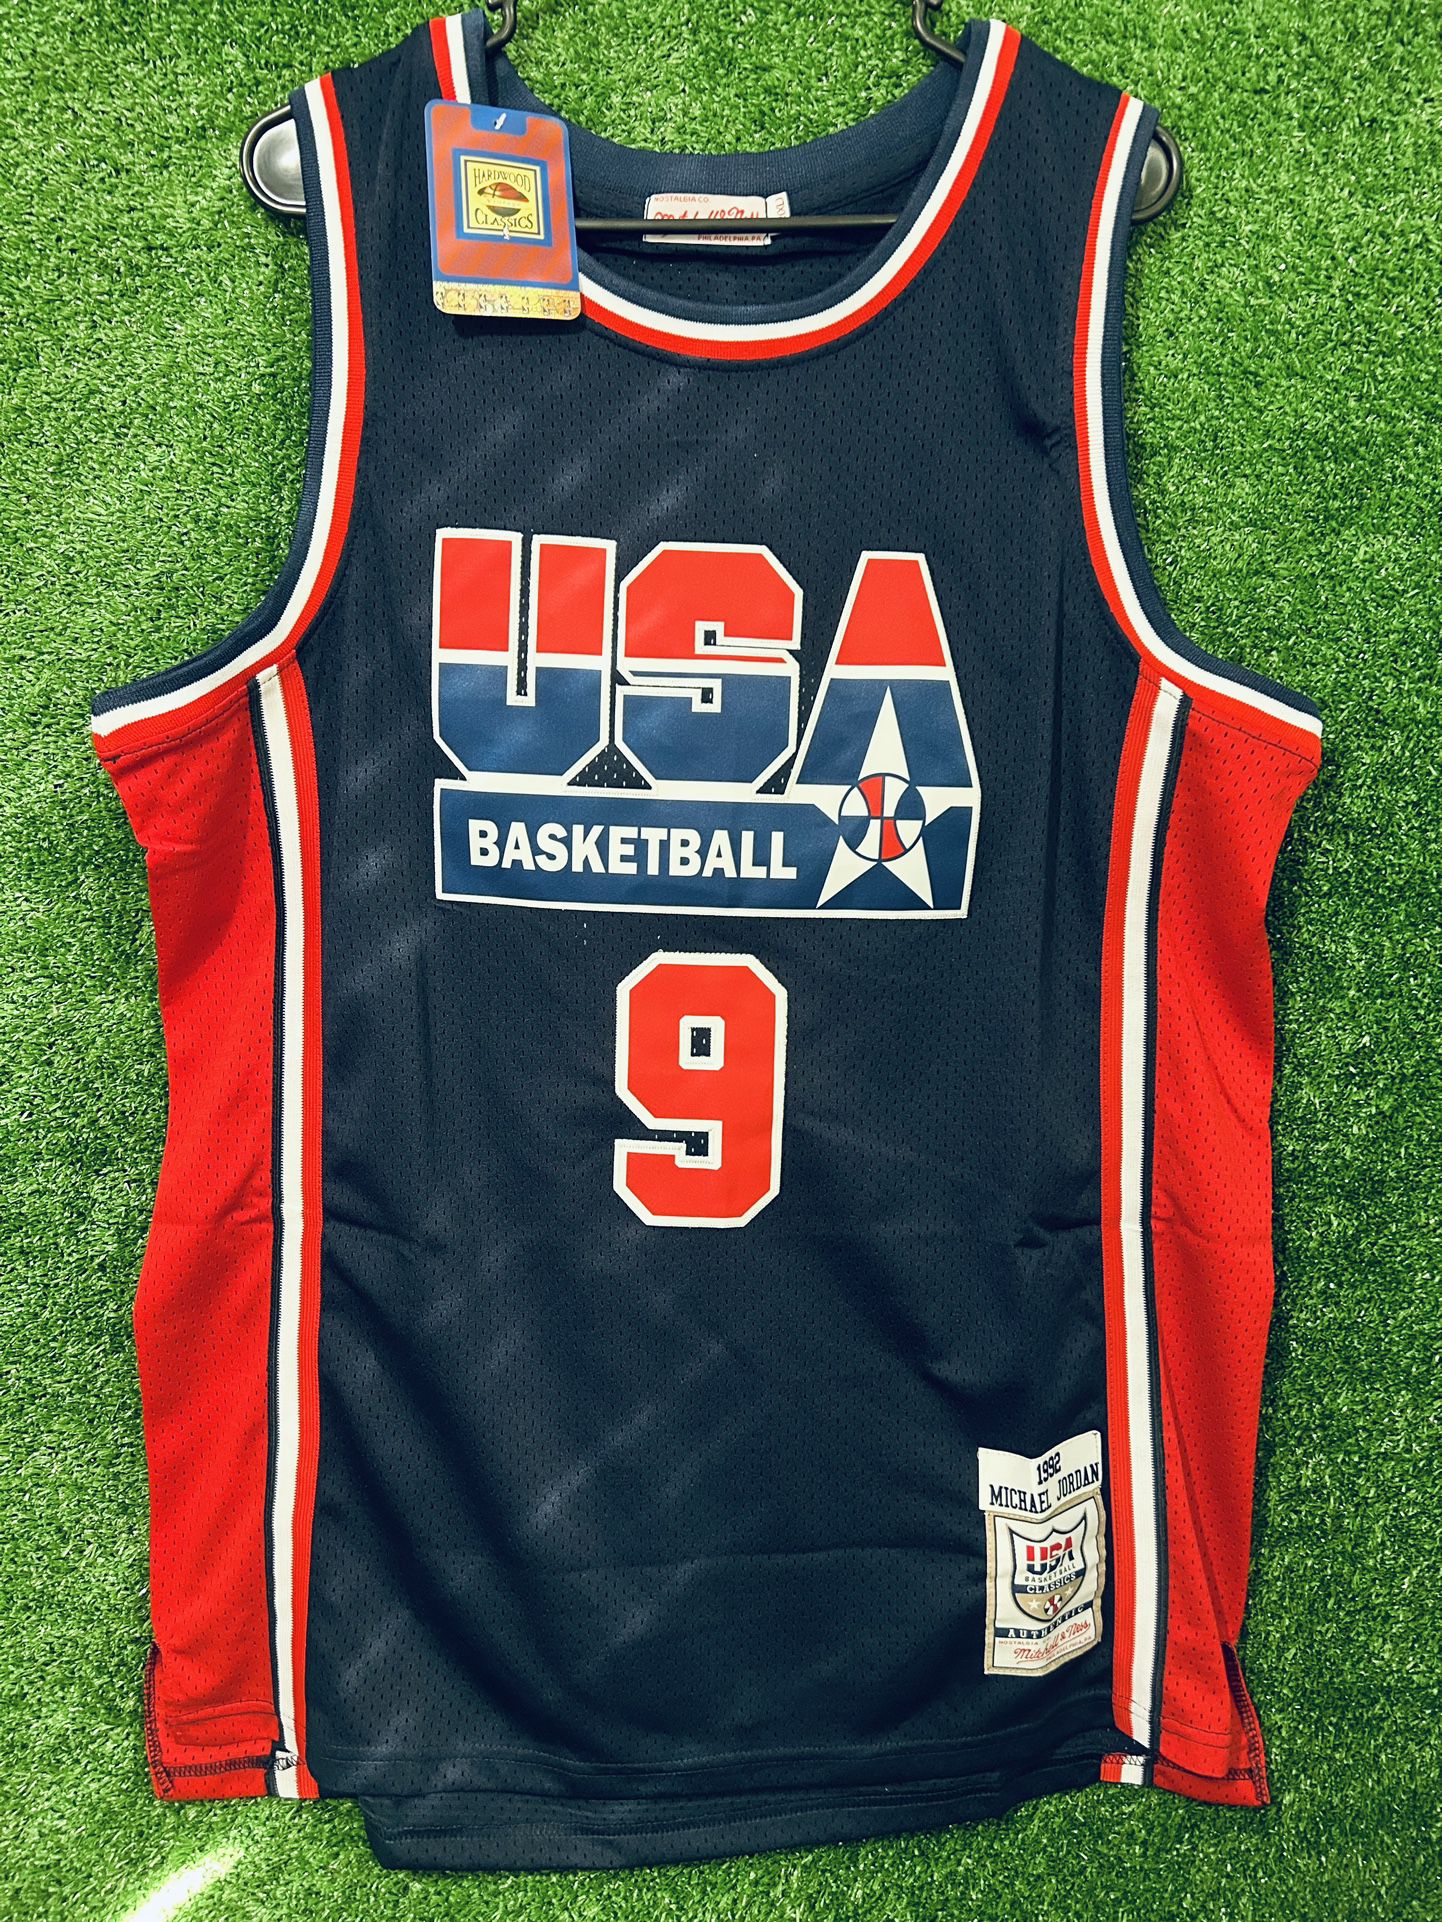 MICHAEL JORDAN TEAM USA MITCHELL & NESS JERSEY BRAND NEW WITH TAGS SIZES MEDIUM, LARGE AND XL AVAILABLE